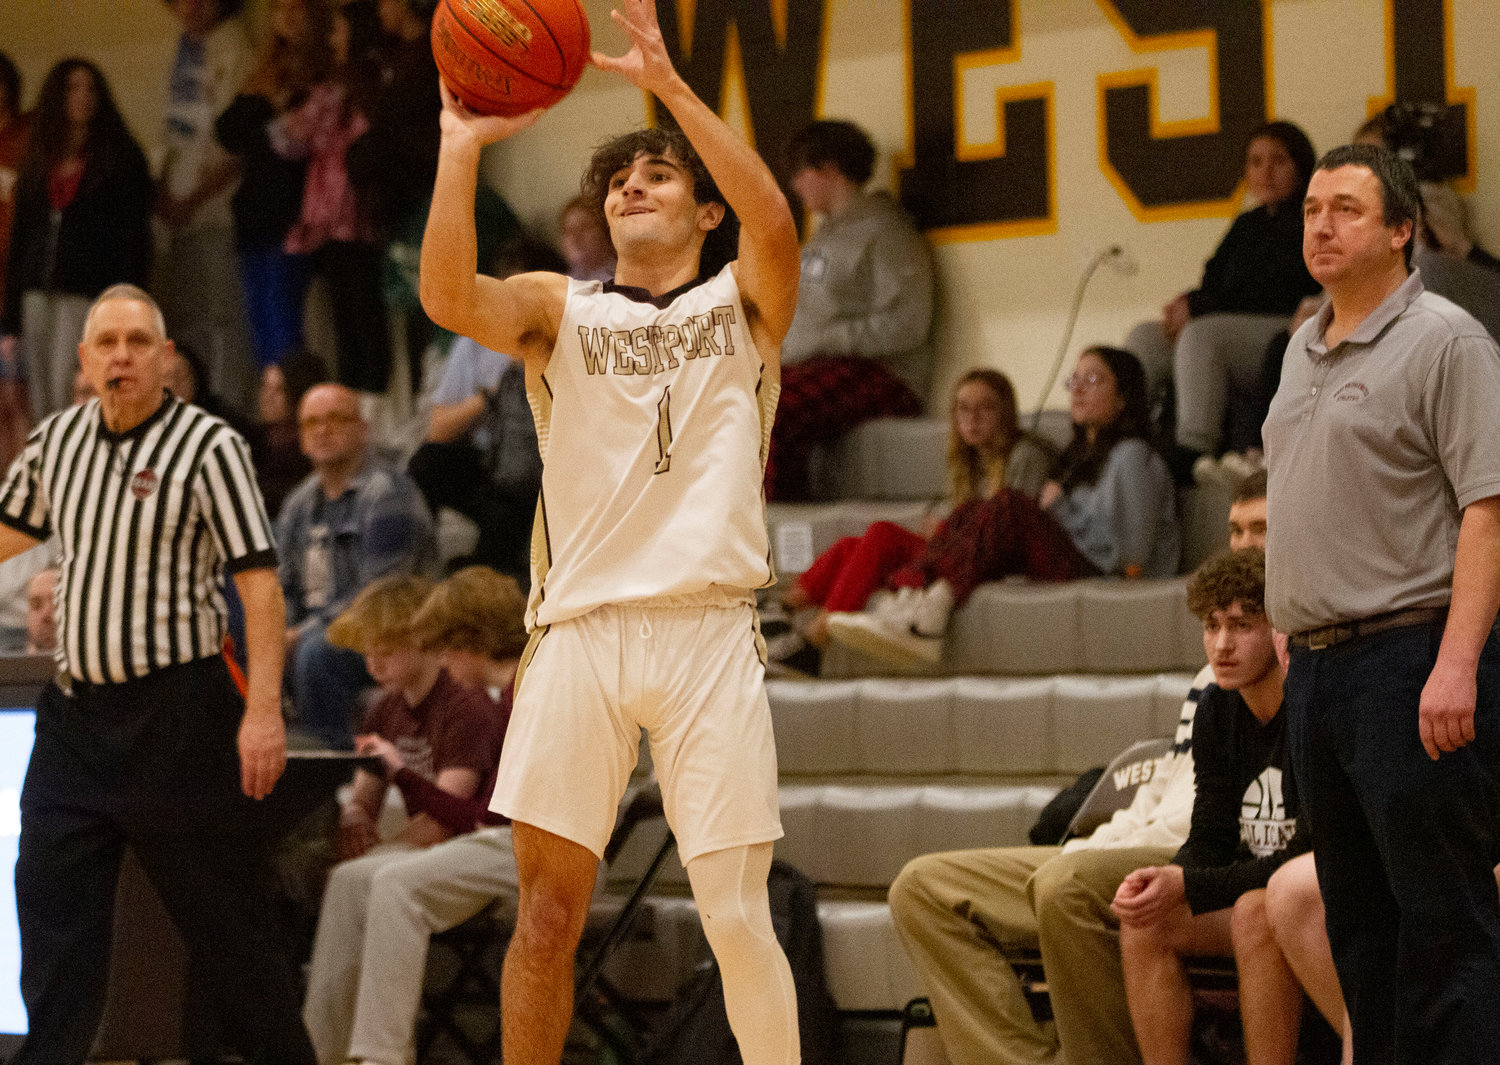 Hunter Brodeur has found his scoring touch of late. The senior co-captain scored 50 points in the last two games, 23 points against Atlantic Charter and  27 points versus Holbrook.